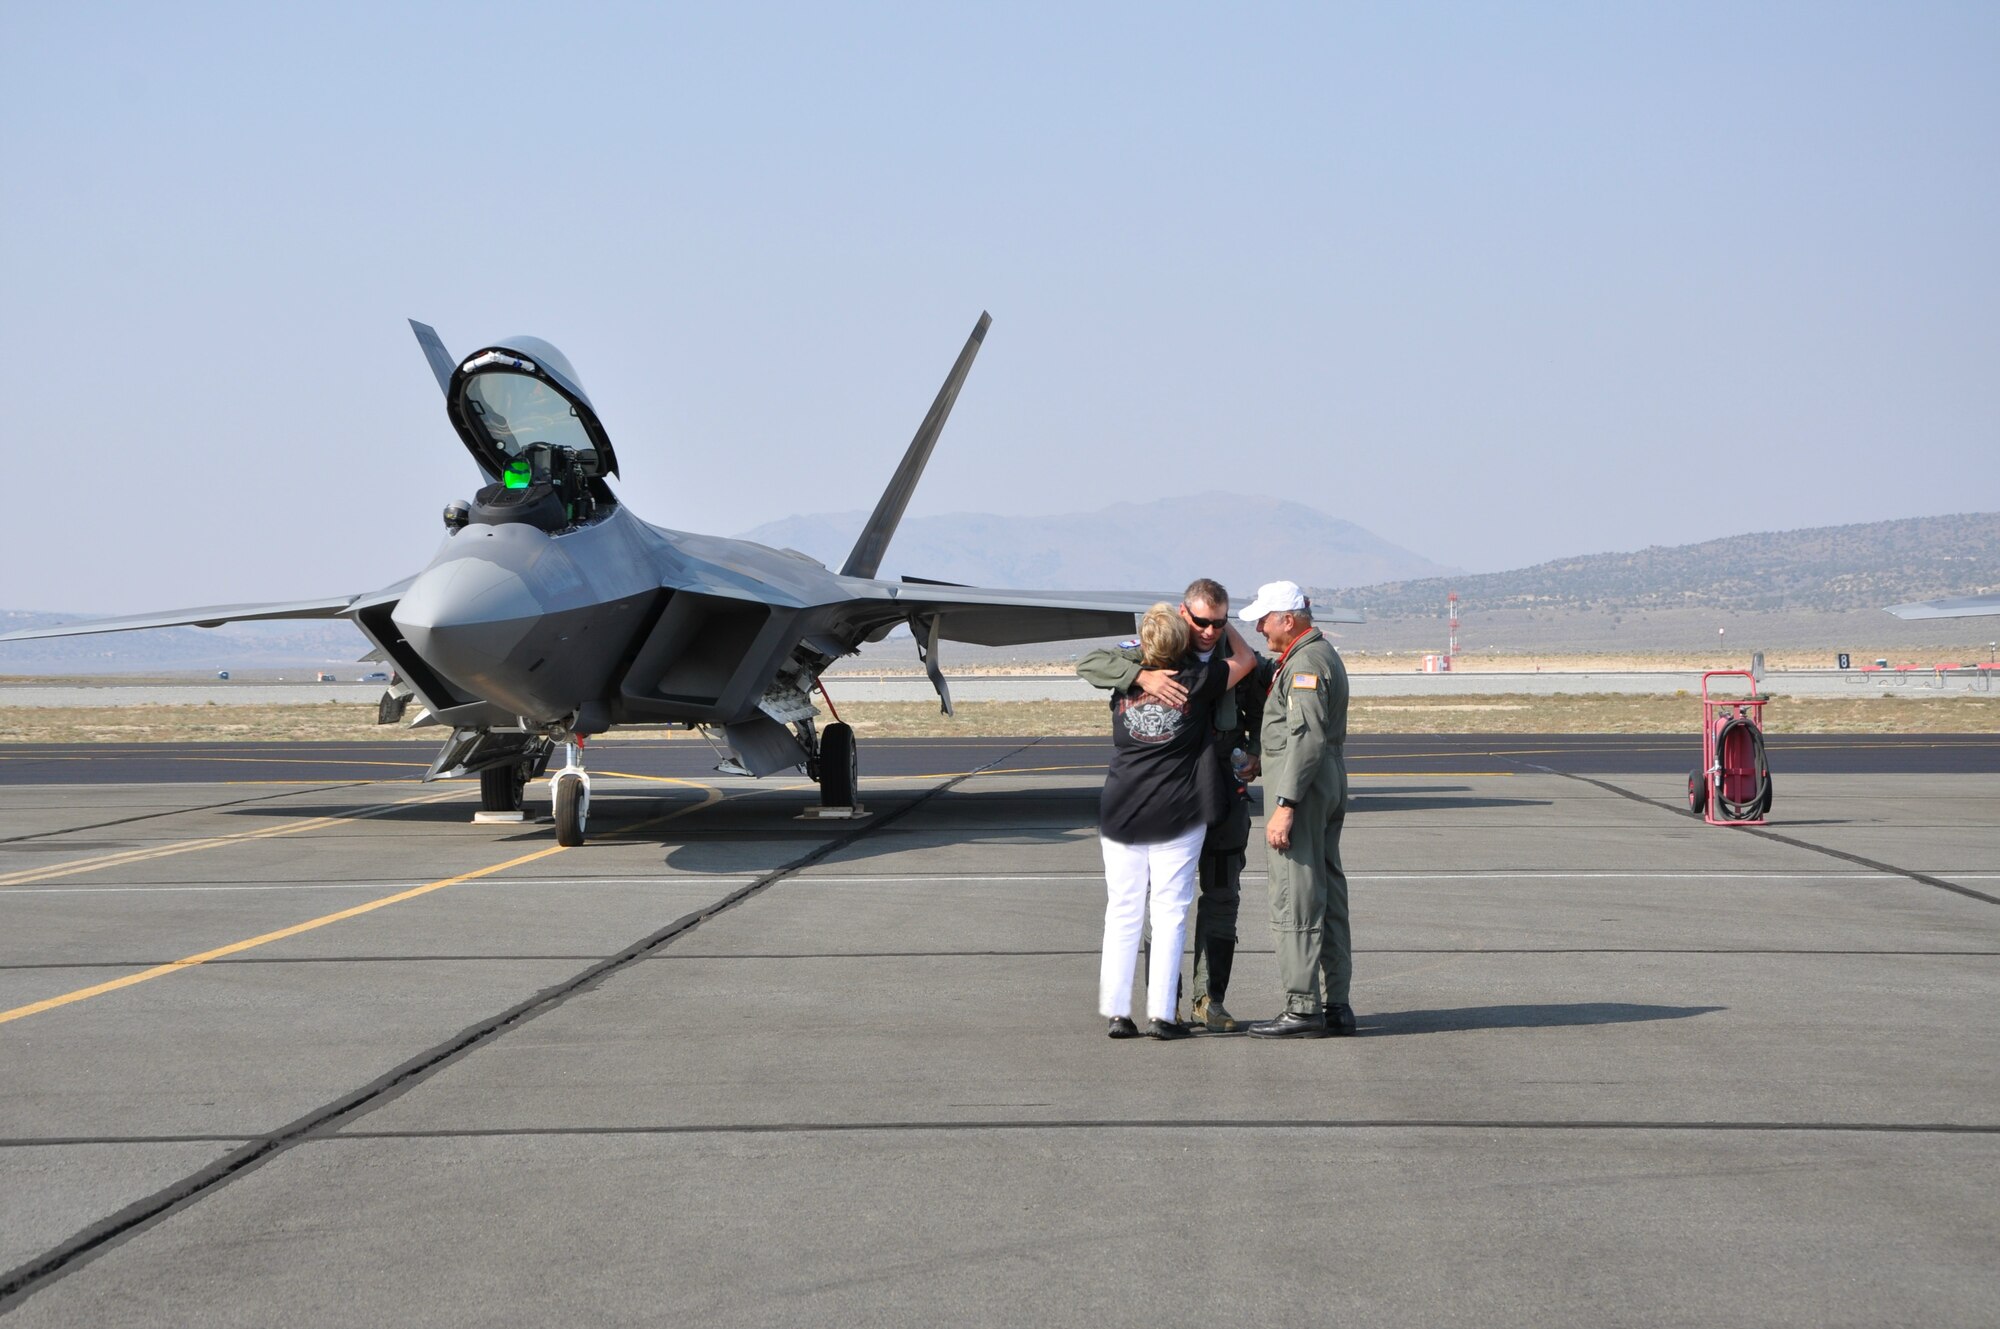 Lt. Col. Kevin Sutterfield is met by his parents Stan and Pat after landing his F-22 at Reno Sept. 9. Both Sutterfield and his father, Stan, competed in the 51st Annual National Air Races Sept. 10-14.  (U.S. Air Force/Maj. Ashley Conner)